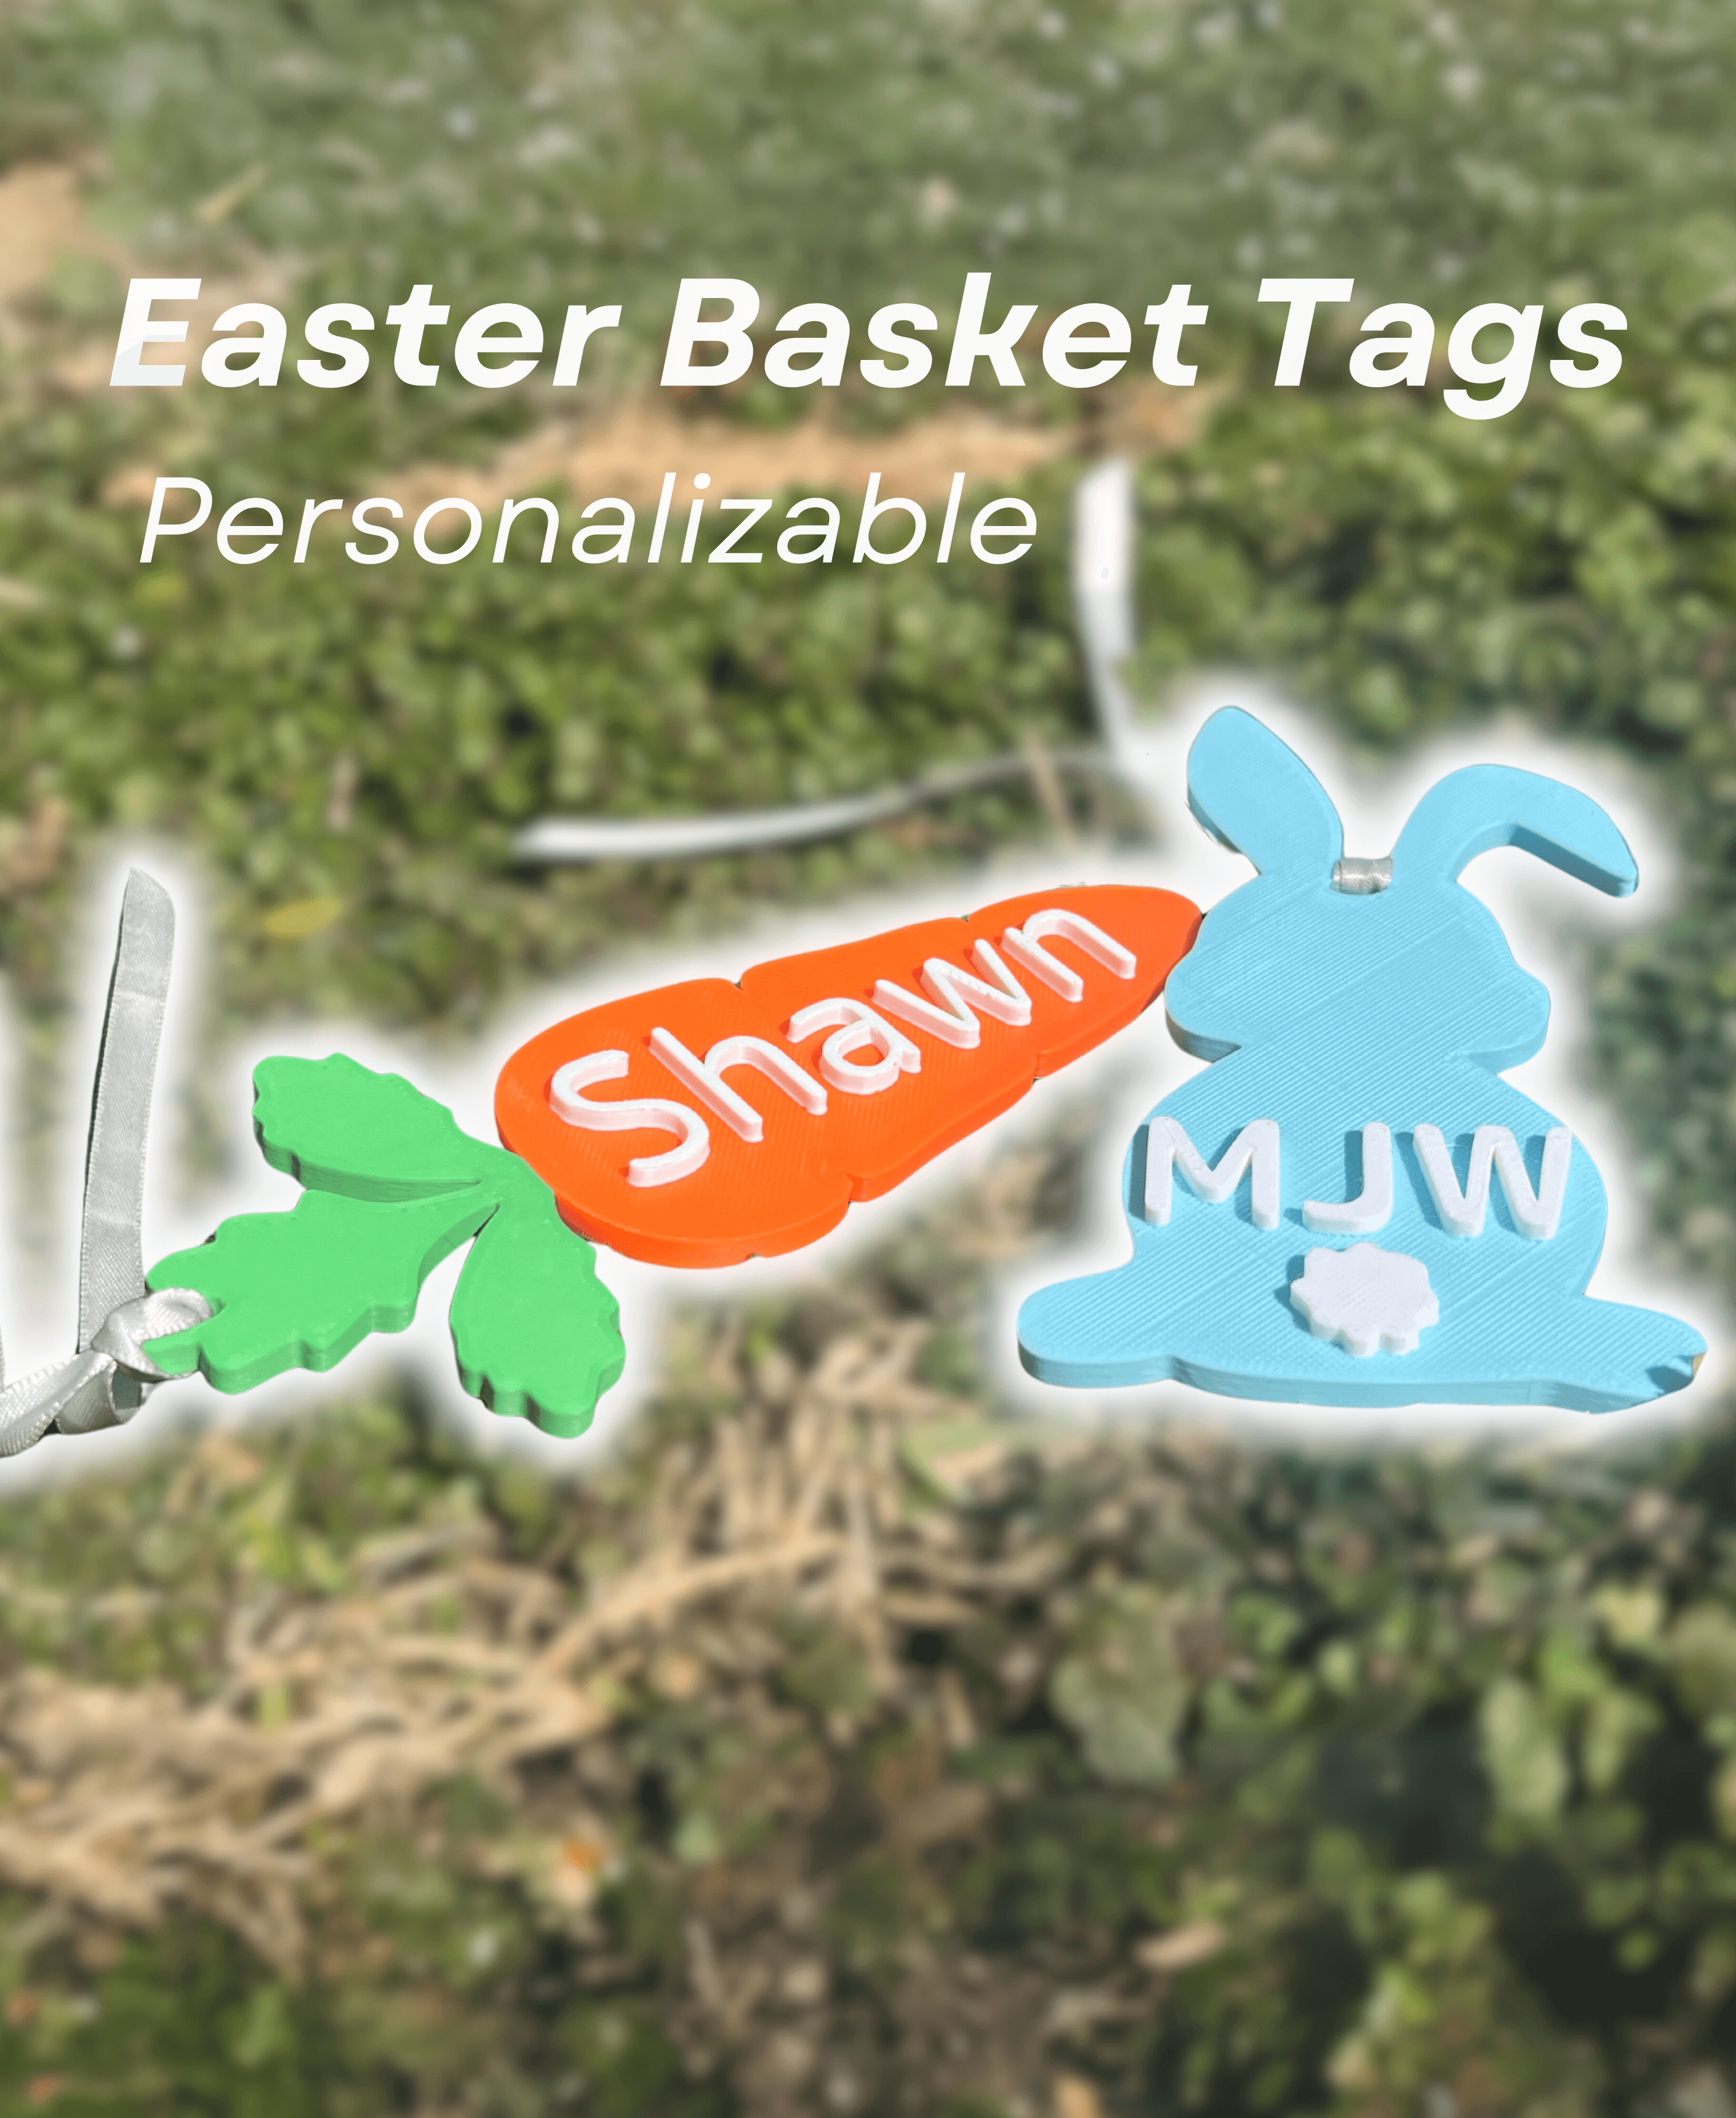 Personalizable Easter Basket Tags 3d model